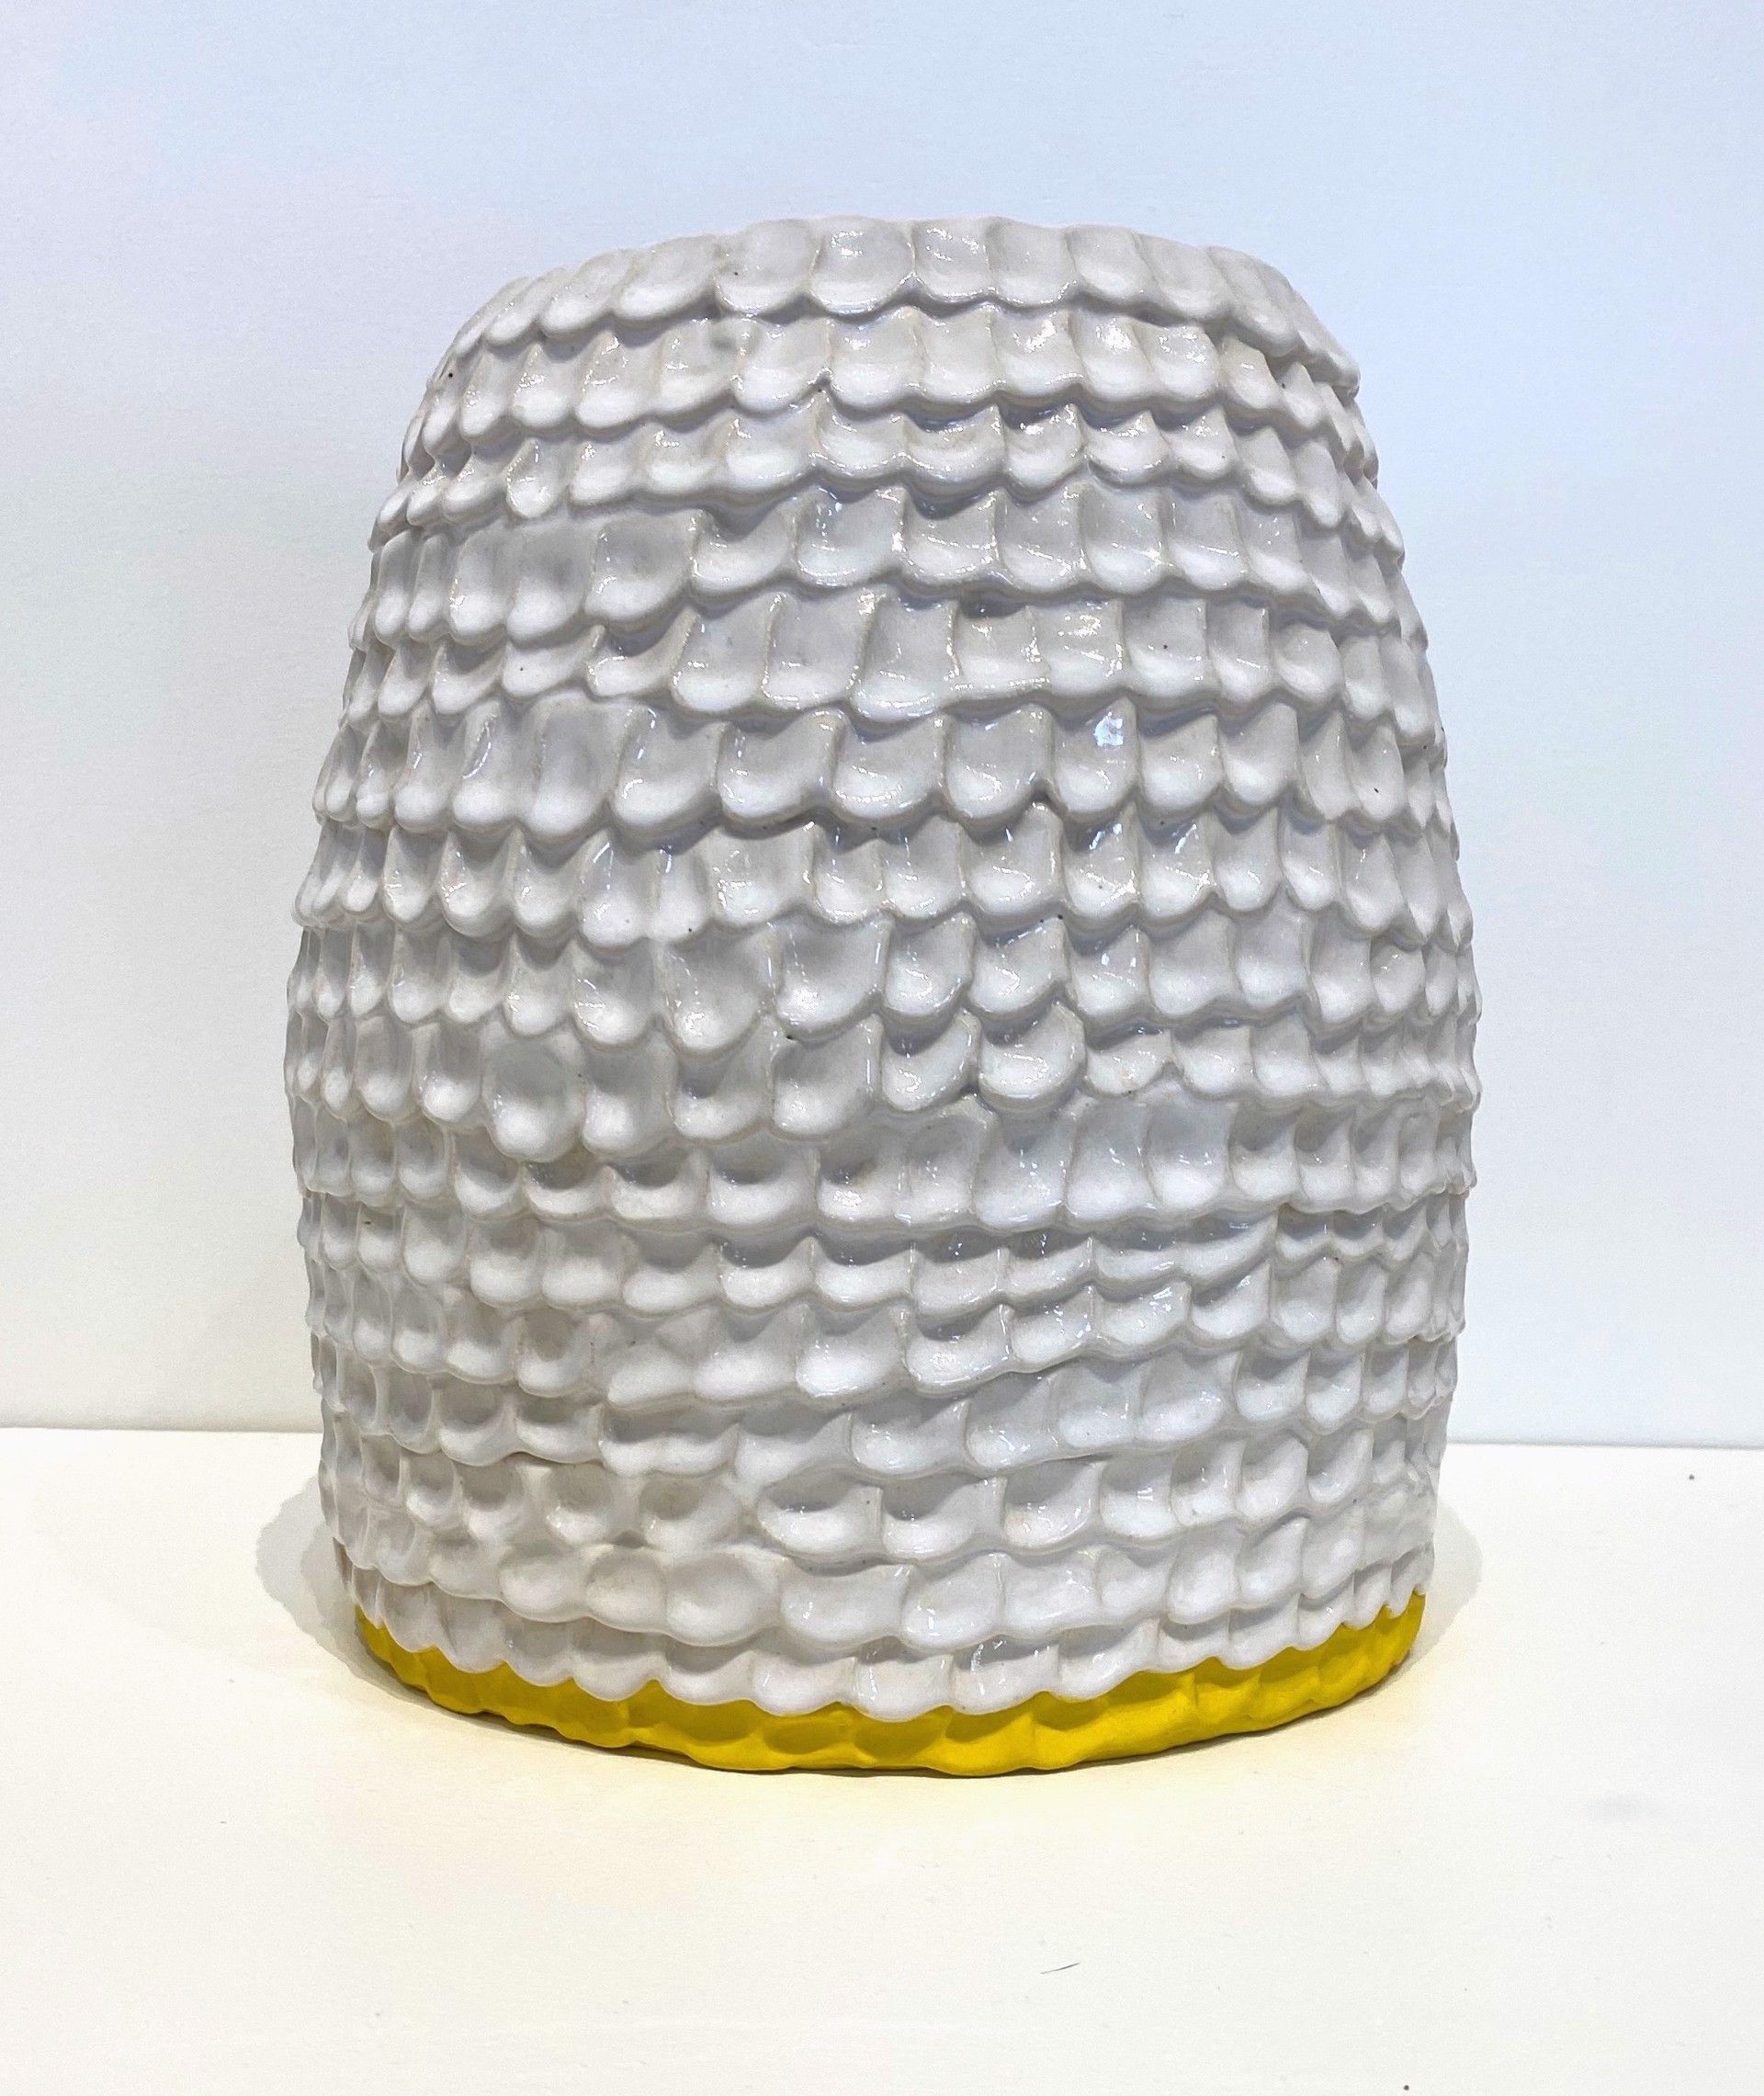 Large White Hive with Yellow Base by Bean Finneran